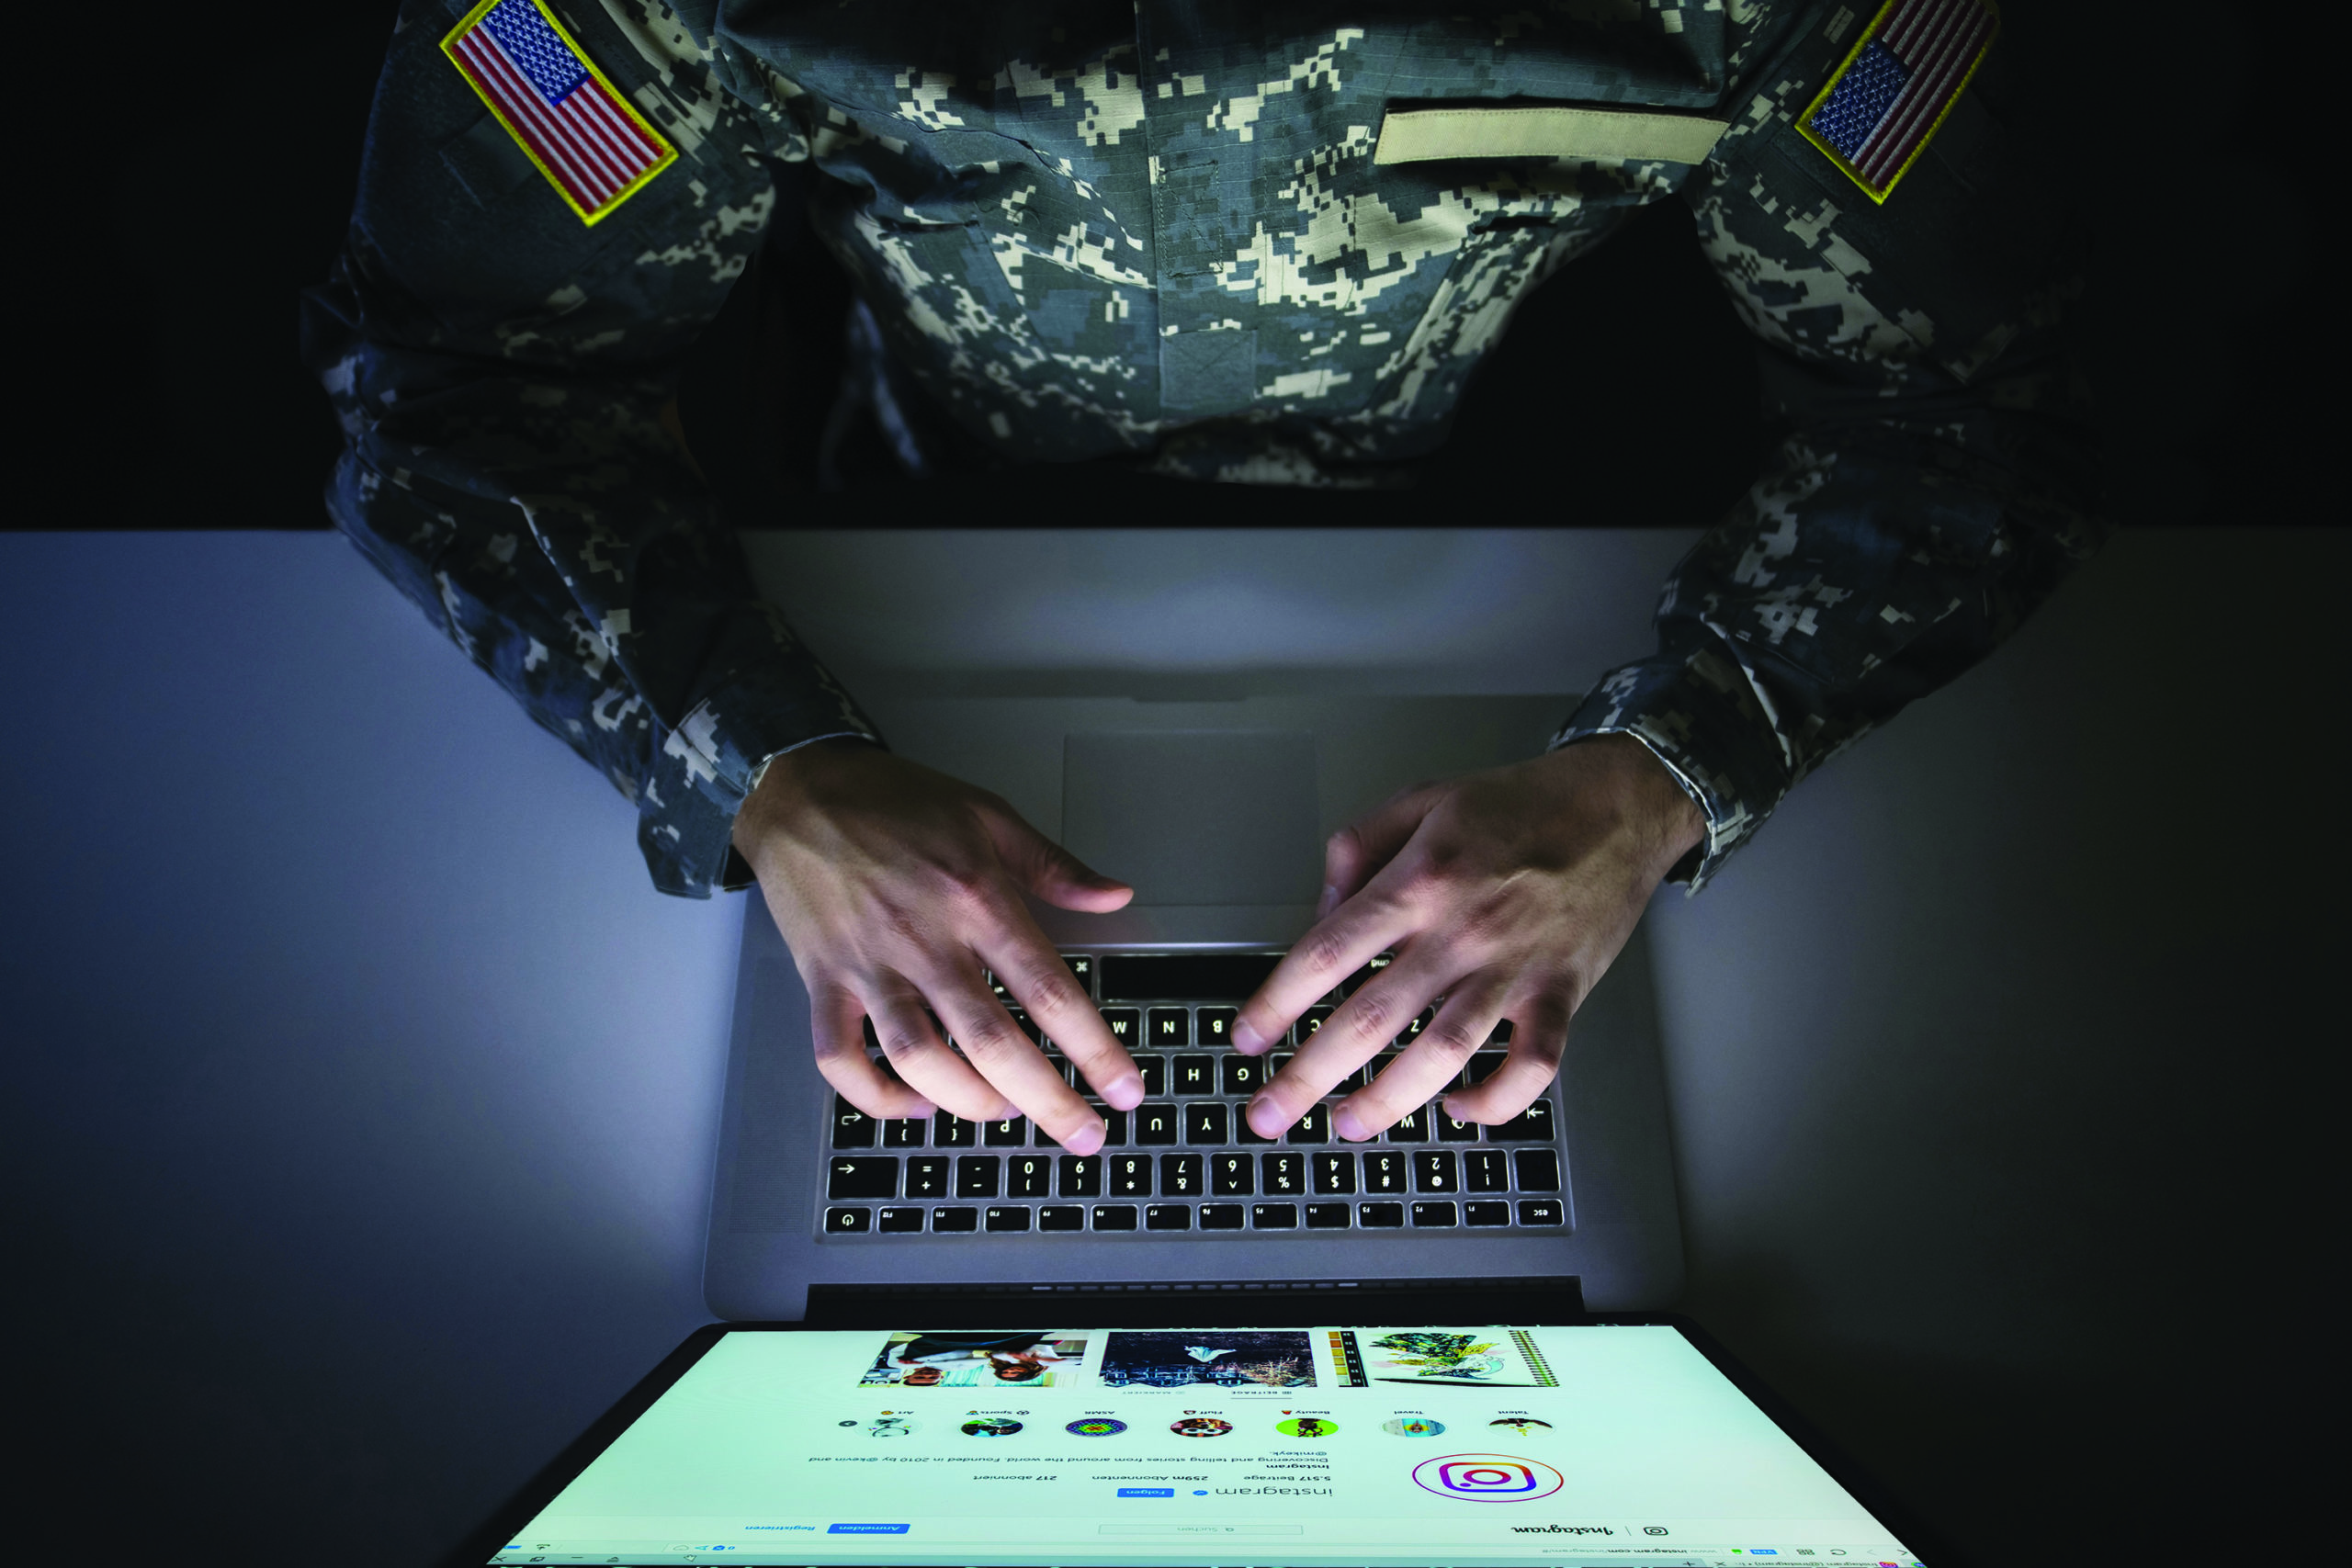 Phantom generic image of a soldier on a computer